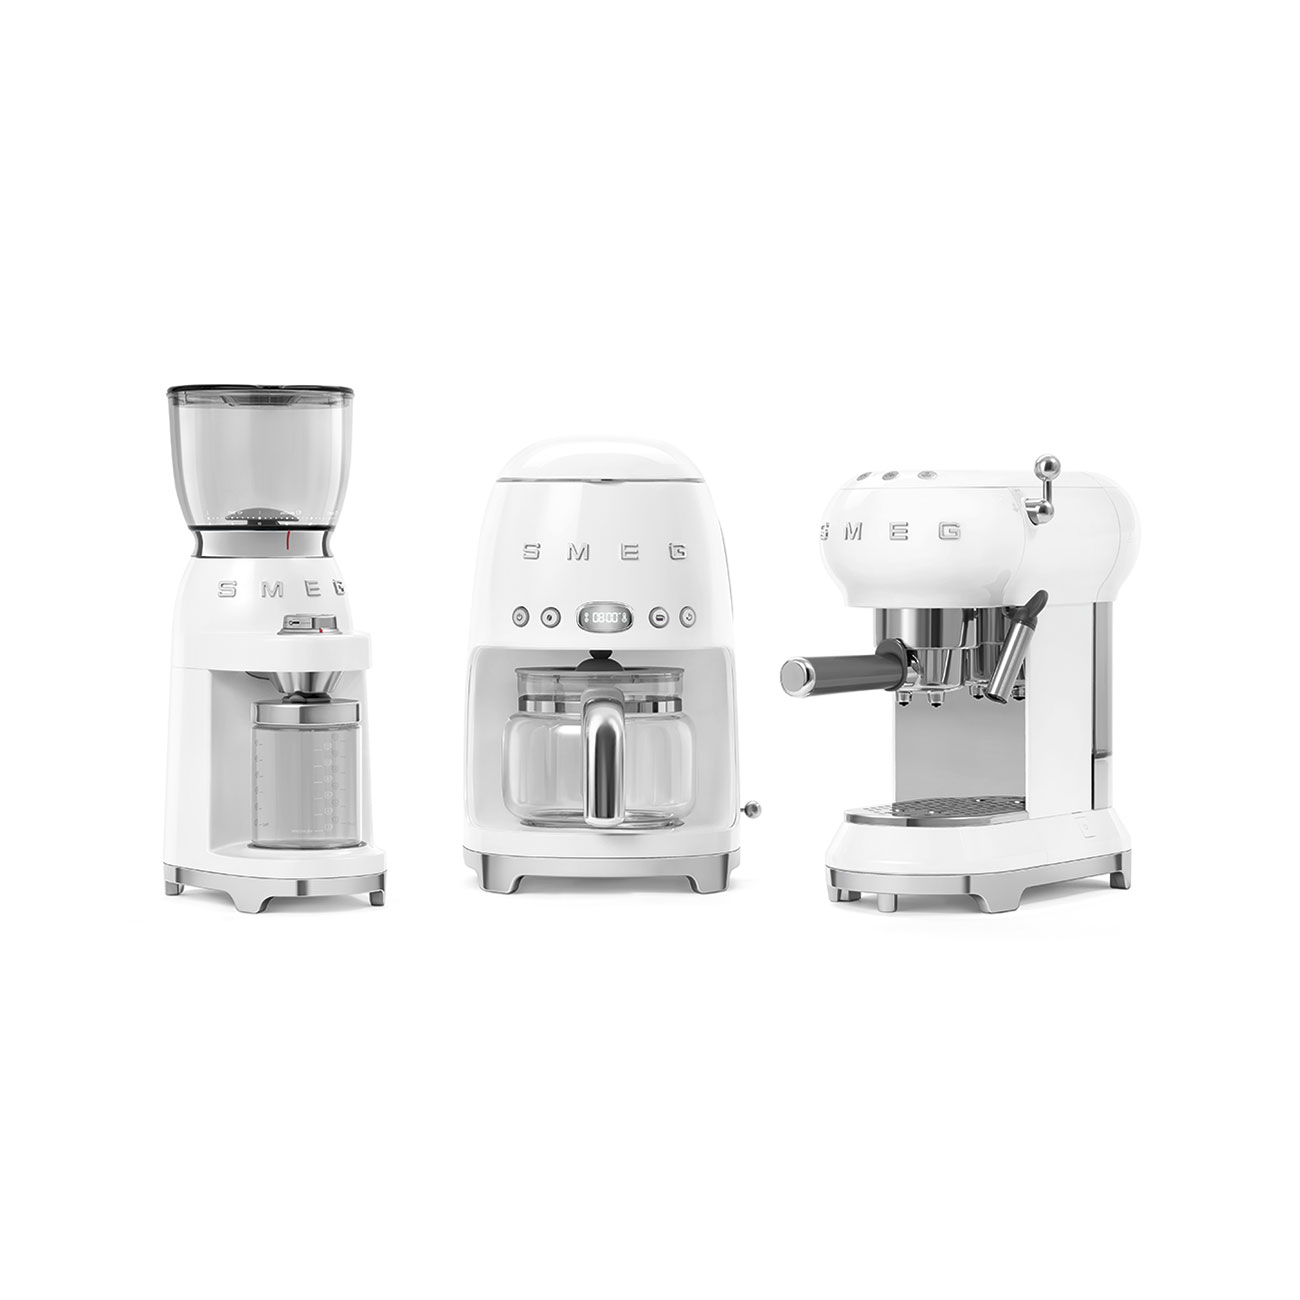 White Coffee Grinder featuring a conical burr - CGF01WHUK - Smeg_6